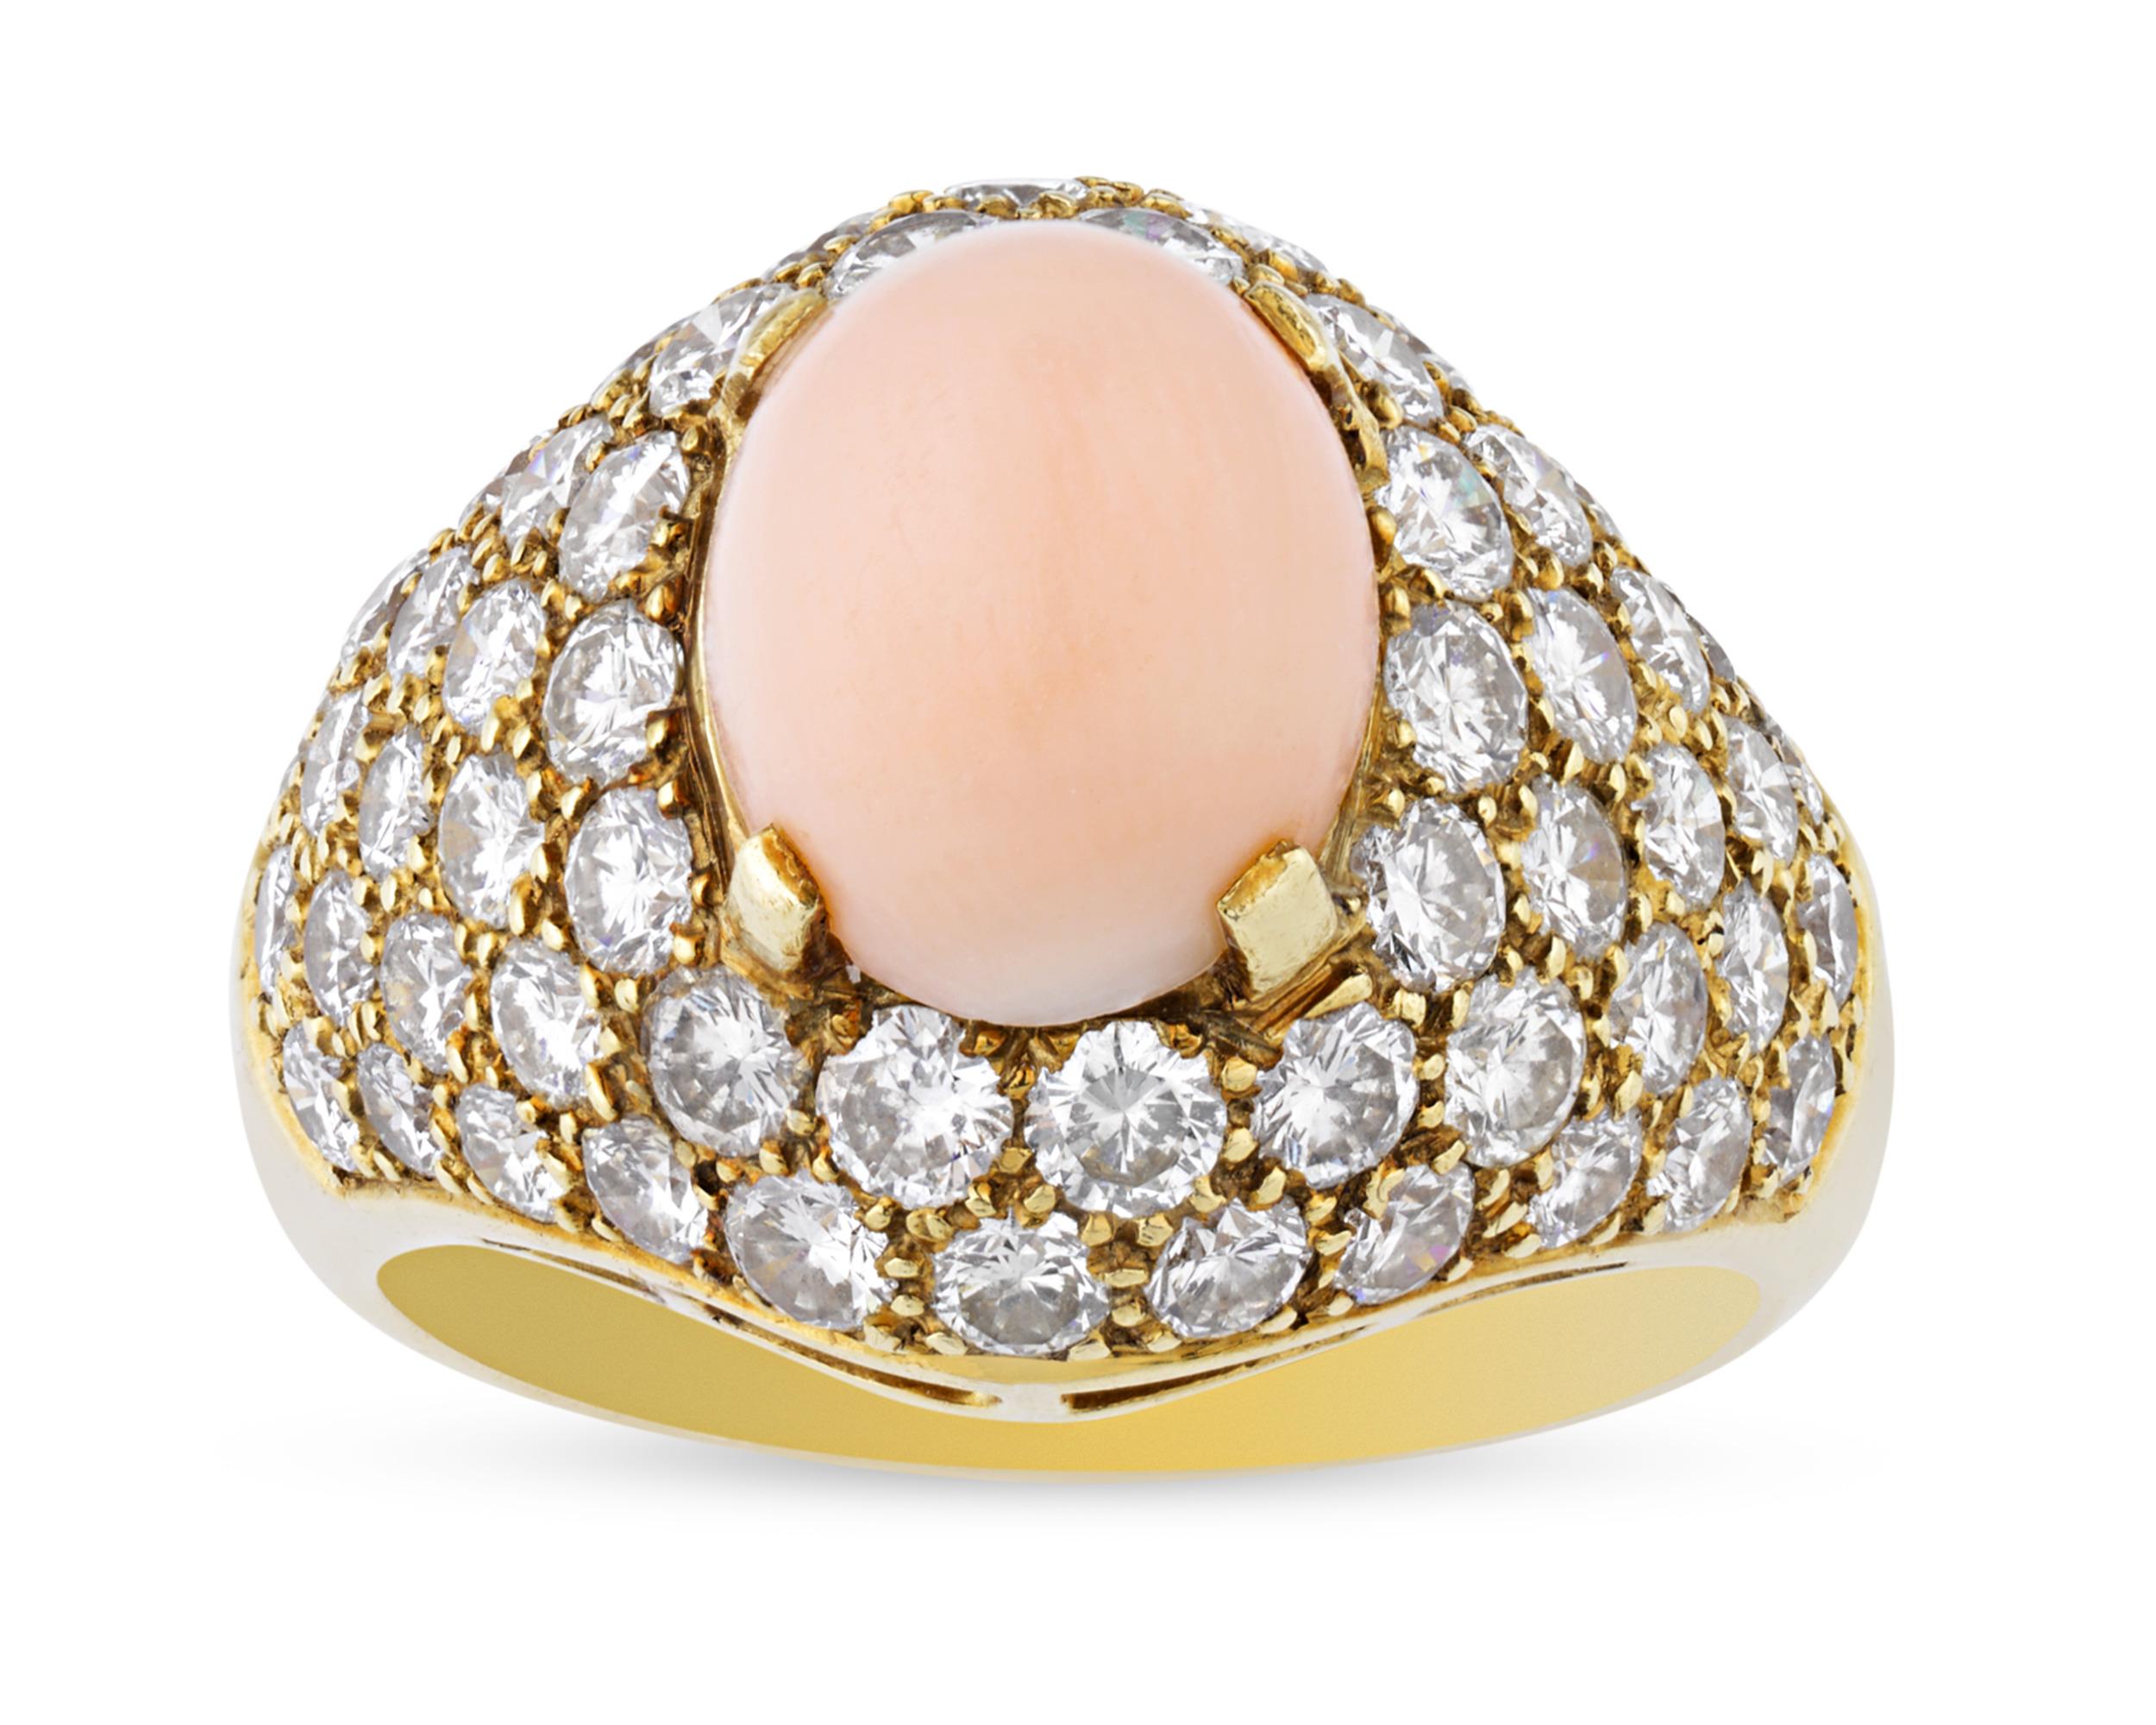 This vintage coral and diamond ring by the French jewelry maison Van Cleef & Arpels makes a classic statement. The exceptional coral cabochon at its center exhibits a delicate “angel skin” hue, the pale pink color that is most desired in coral